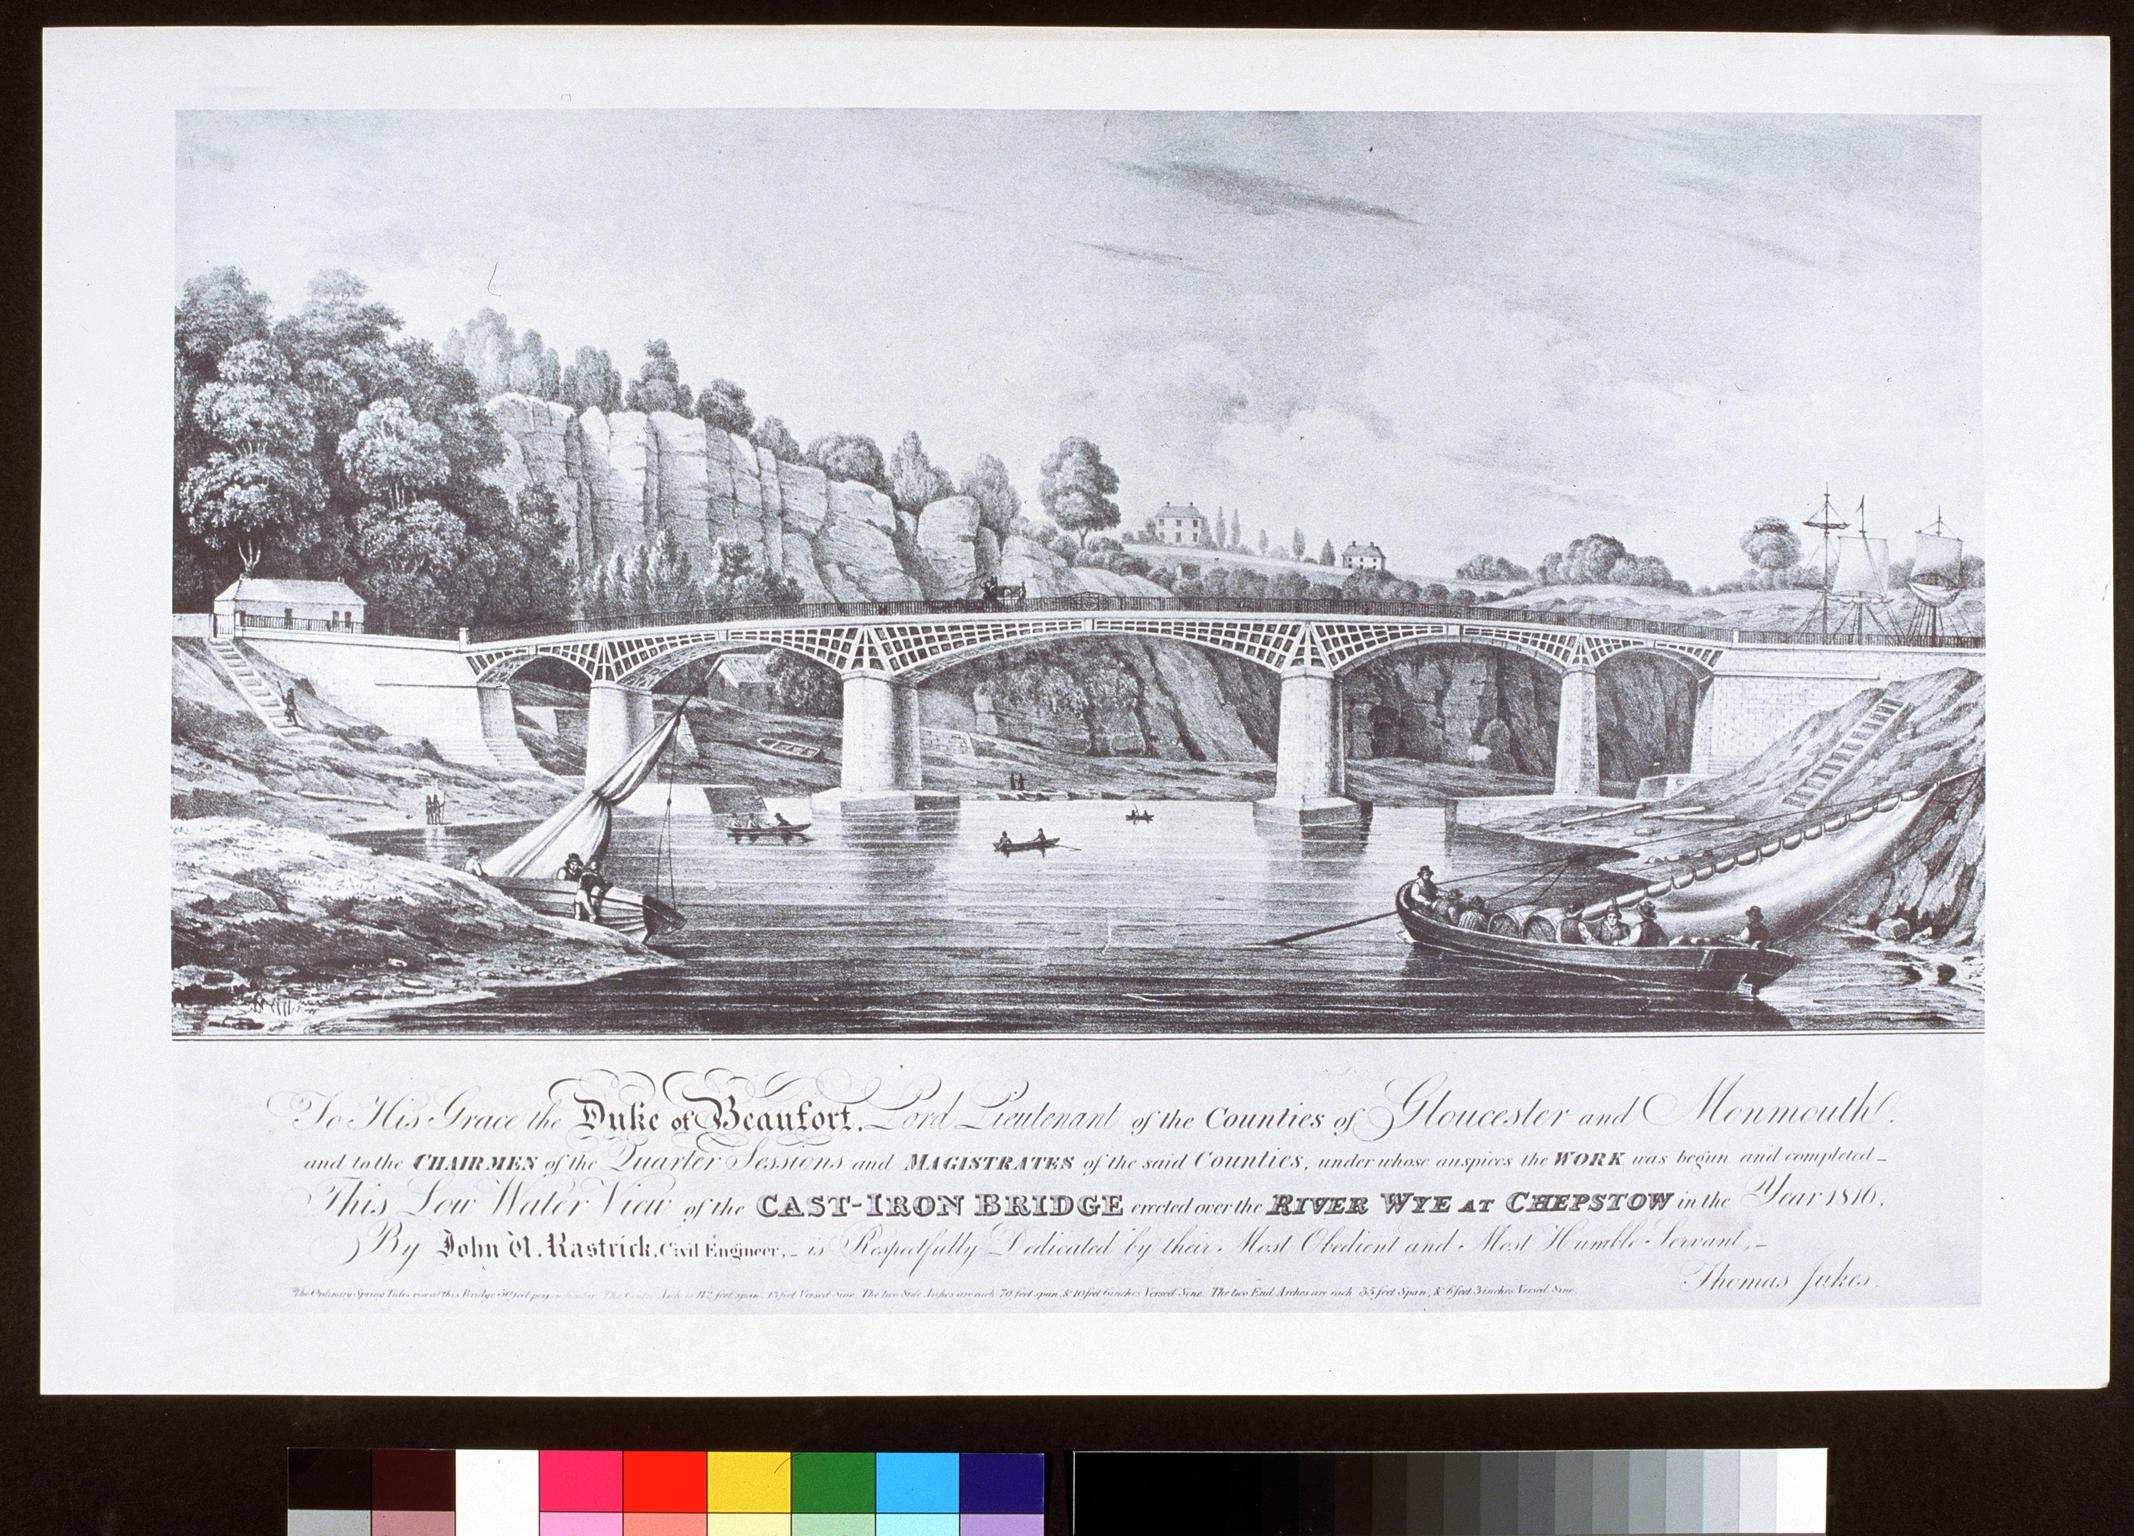 Cast-iron bridge over River Wye at Chepstow, poster